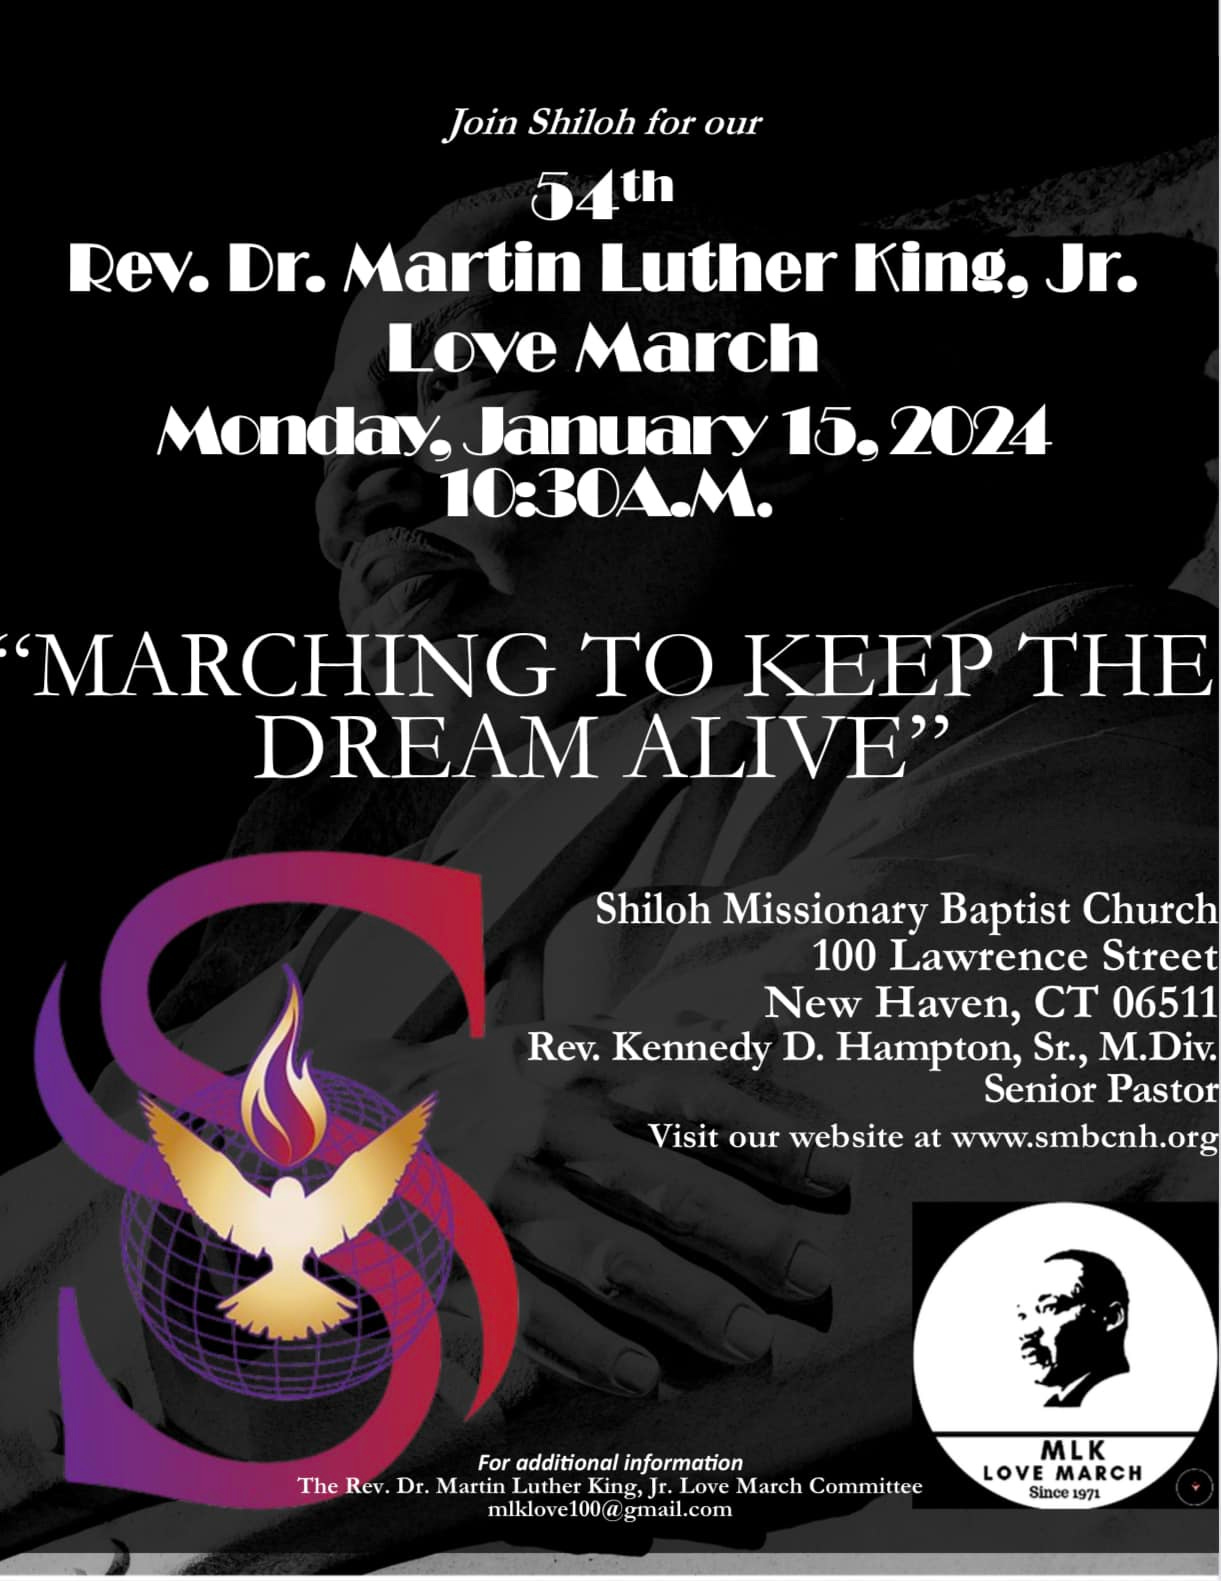 May be an image of 1 person, trumpet, clarinet, saxophone and text that says 'Join Shiloh for our Rev. Dr. Martin Luther King, Jr. Love March Monday. January 15.2024 10:30A.M. 'MARCHING TO KEEP THE DREAM ALIVE" Shiloh Missionary Baptist Church 100 Lawrence Street New Haven, CT 06511 Rev. Kennedy D. Hampton, Sr., M.Div. Senior Pastor Visit our website at www.smbcnh.org For additional information The Rev. Dr. Martin Luther King .Love March Committee mlklove100@ gmail.com MLK LOVE MARCH Since 1971'